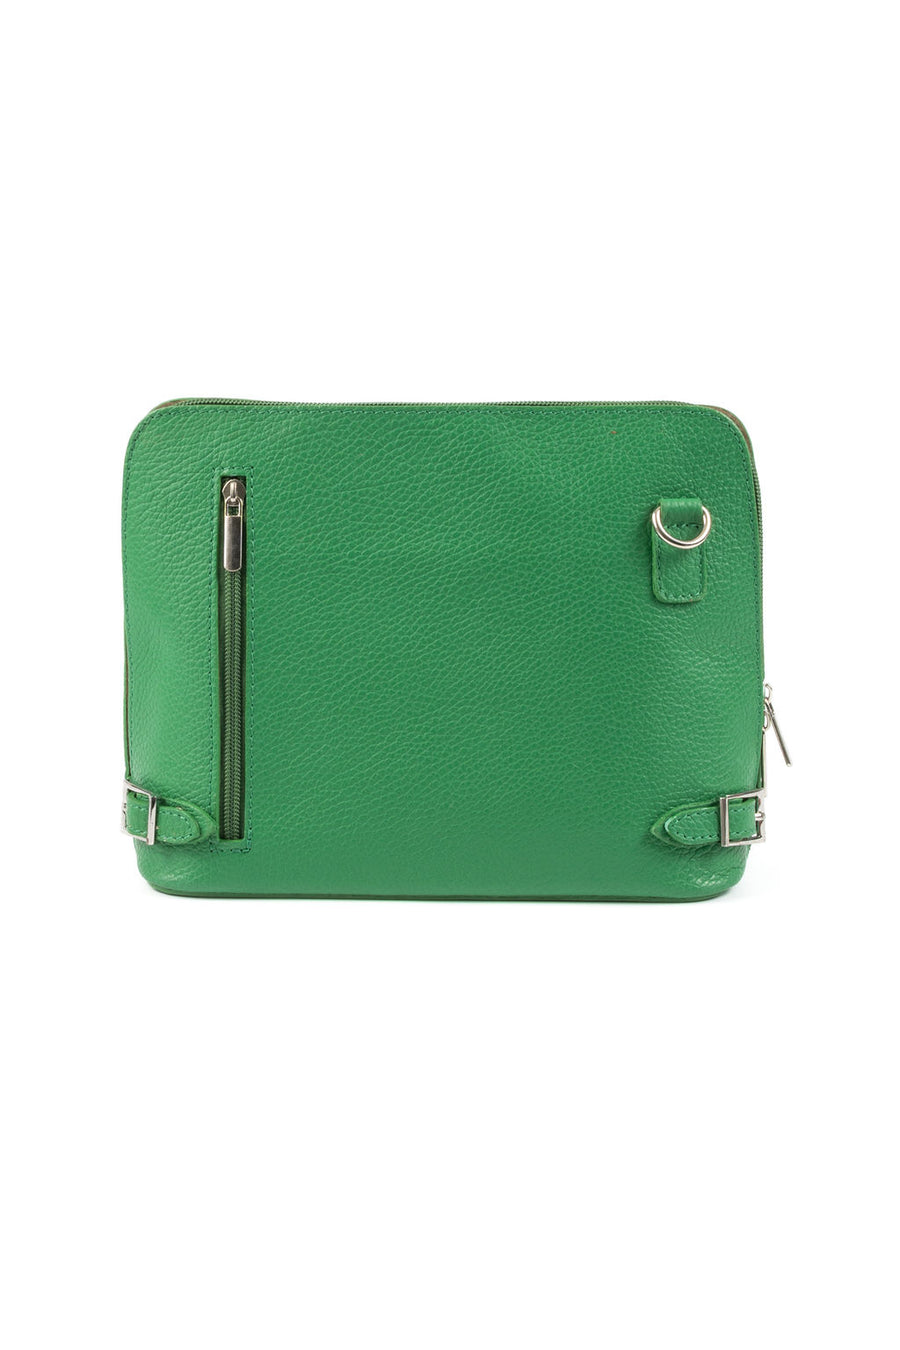 IL GIGLIO Large Trapezoid Cross over body Bag